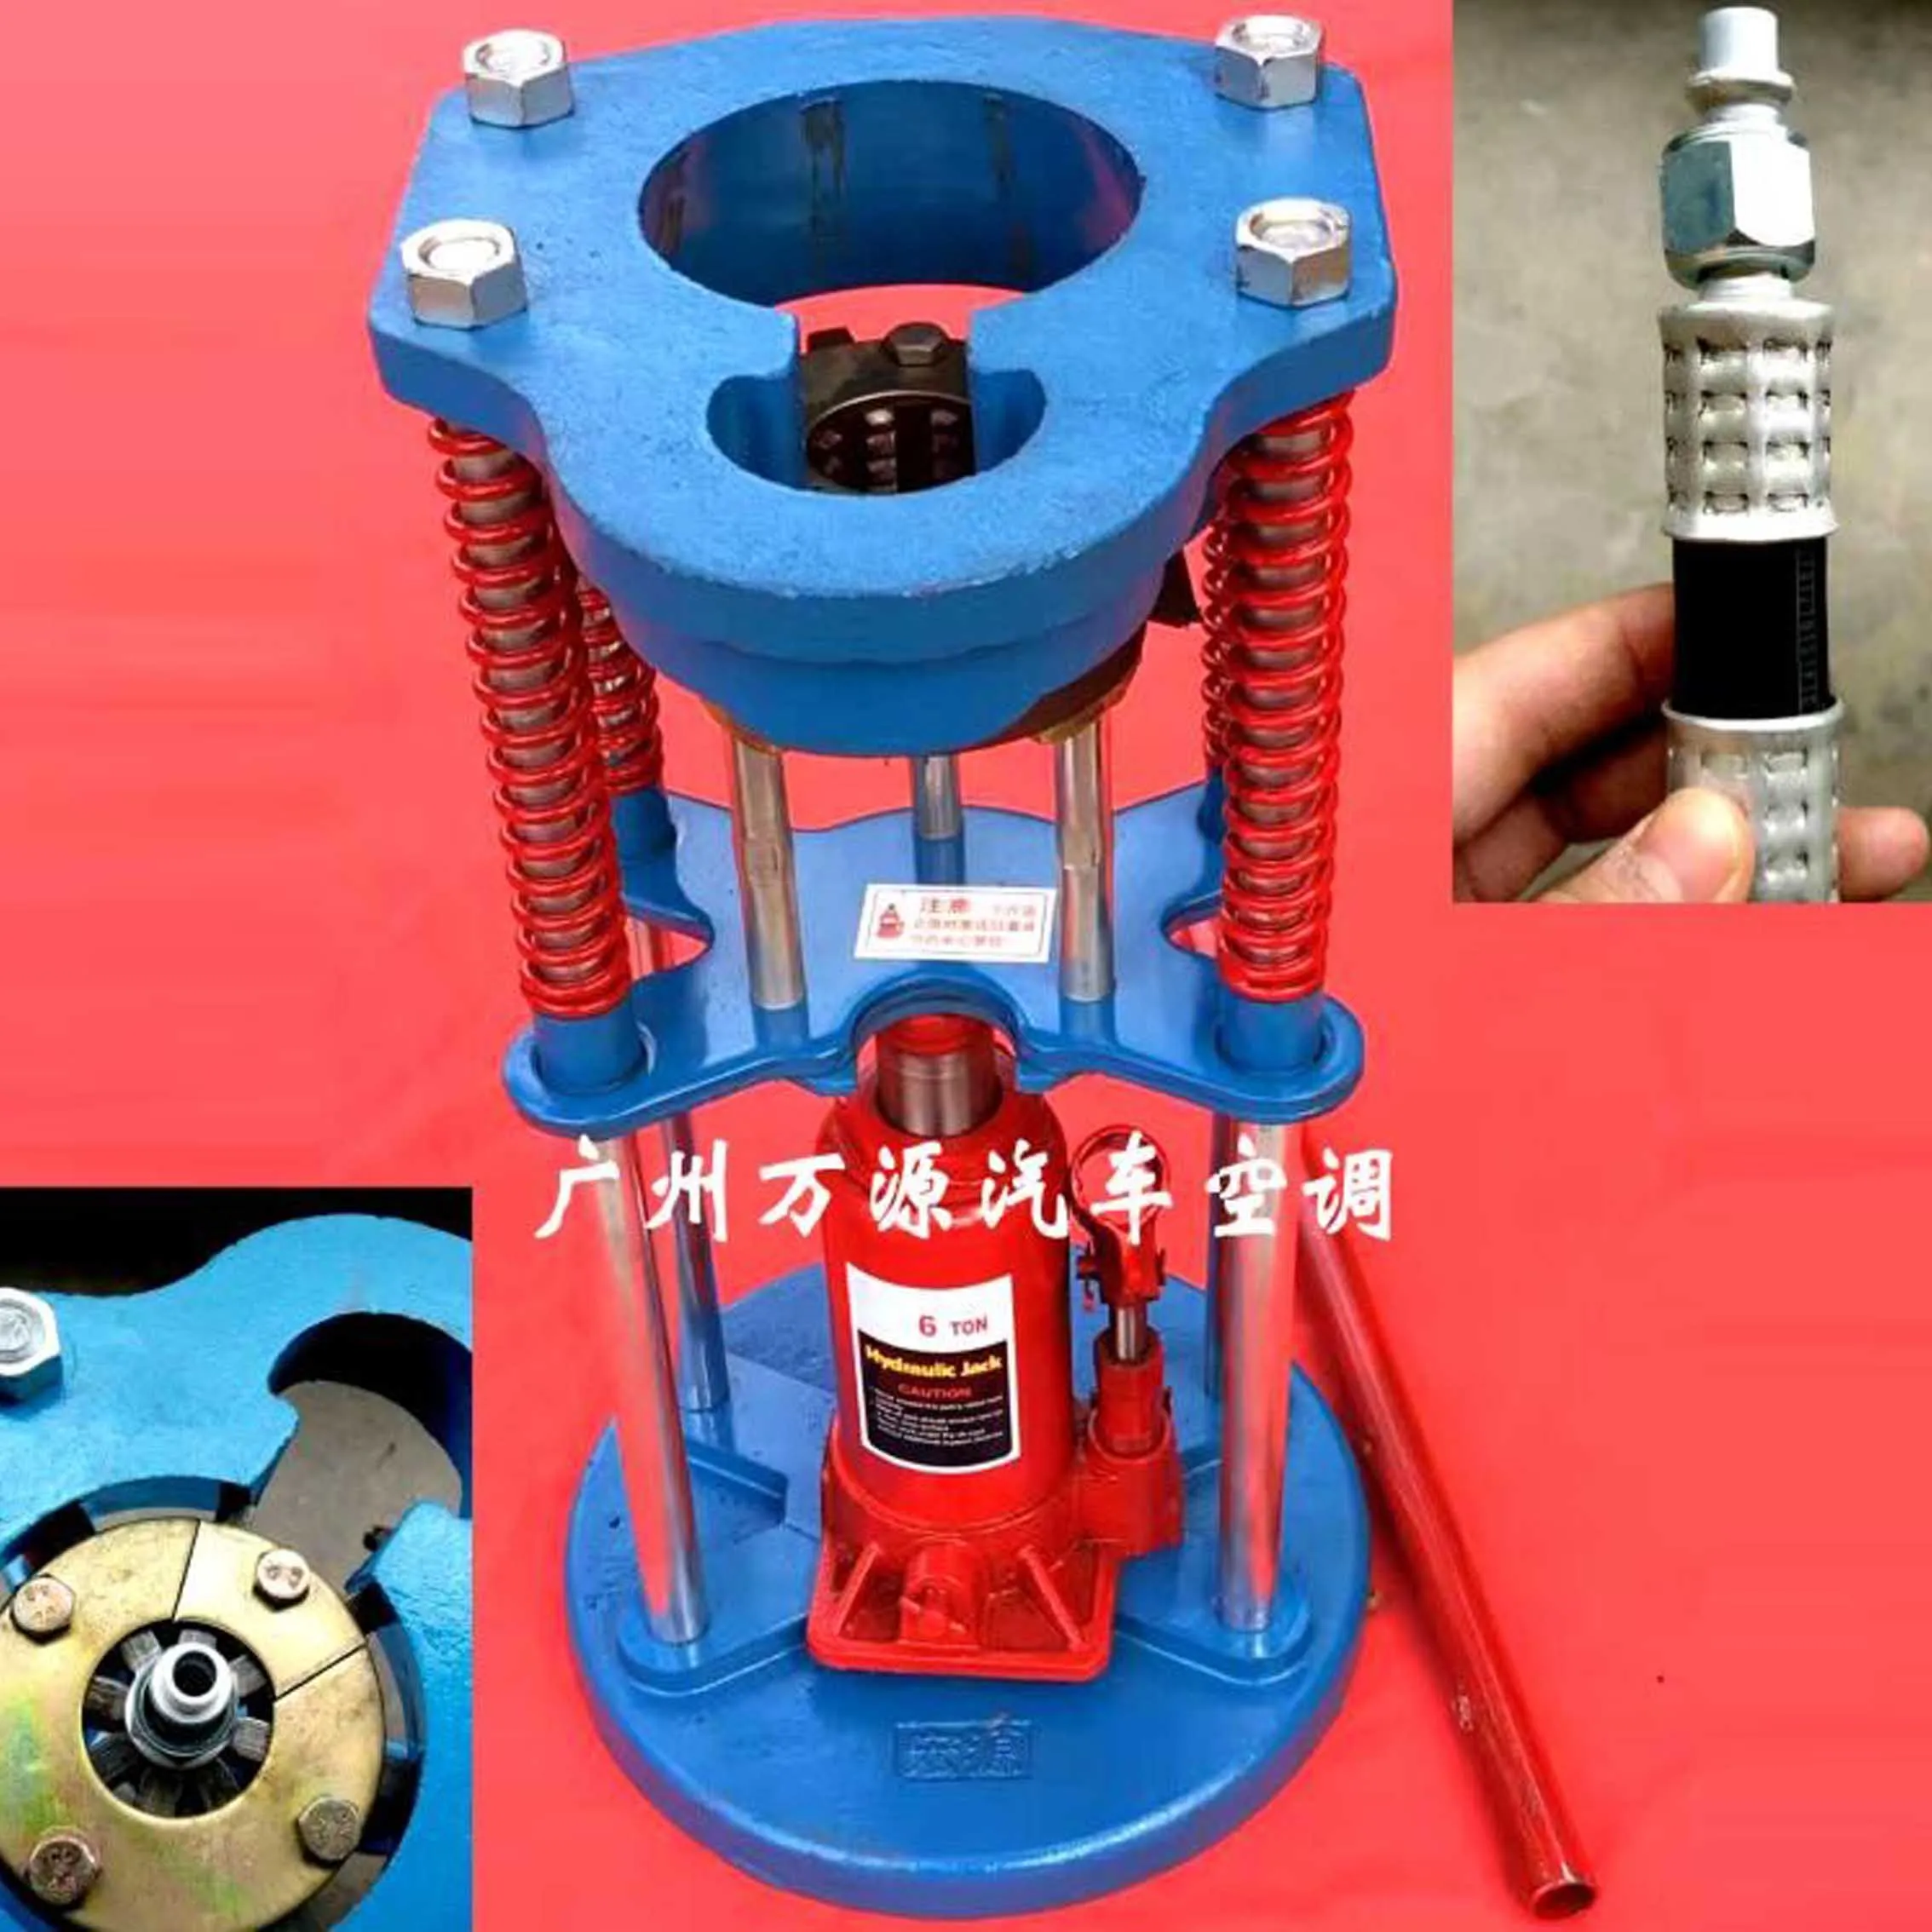 Multi Functional Manual Pipe Crimper Pipe Locking Machine For Auto A/C Hose  R134a R12 Pipe Connector #6 #8 #10 #12 #14 AliExpress